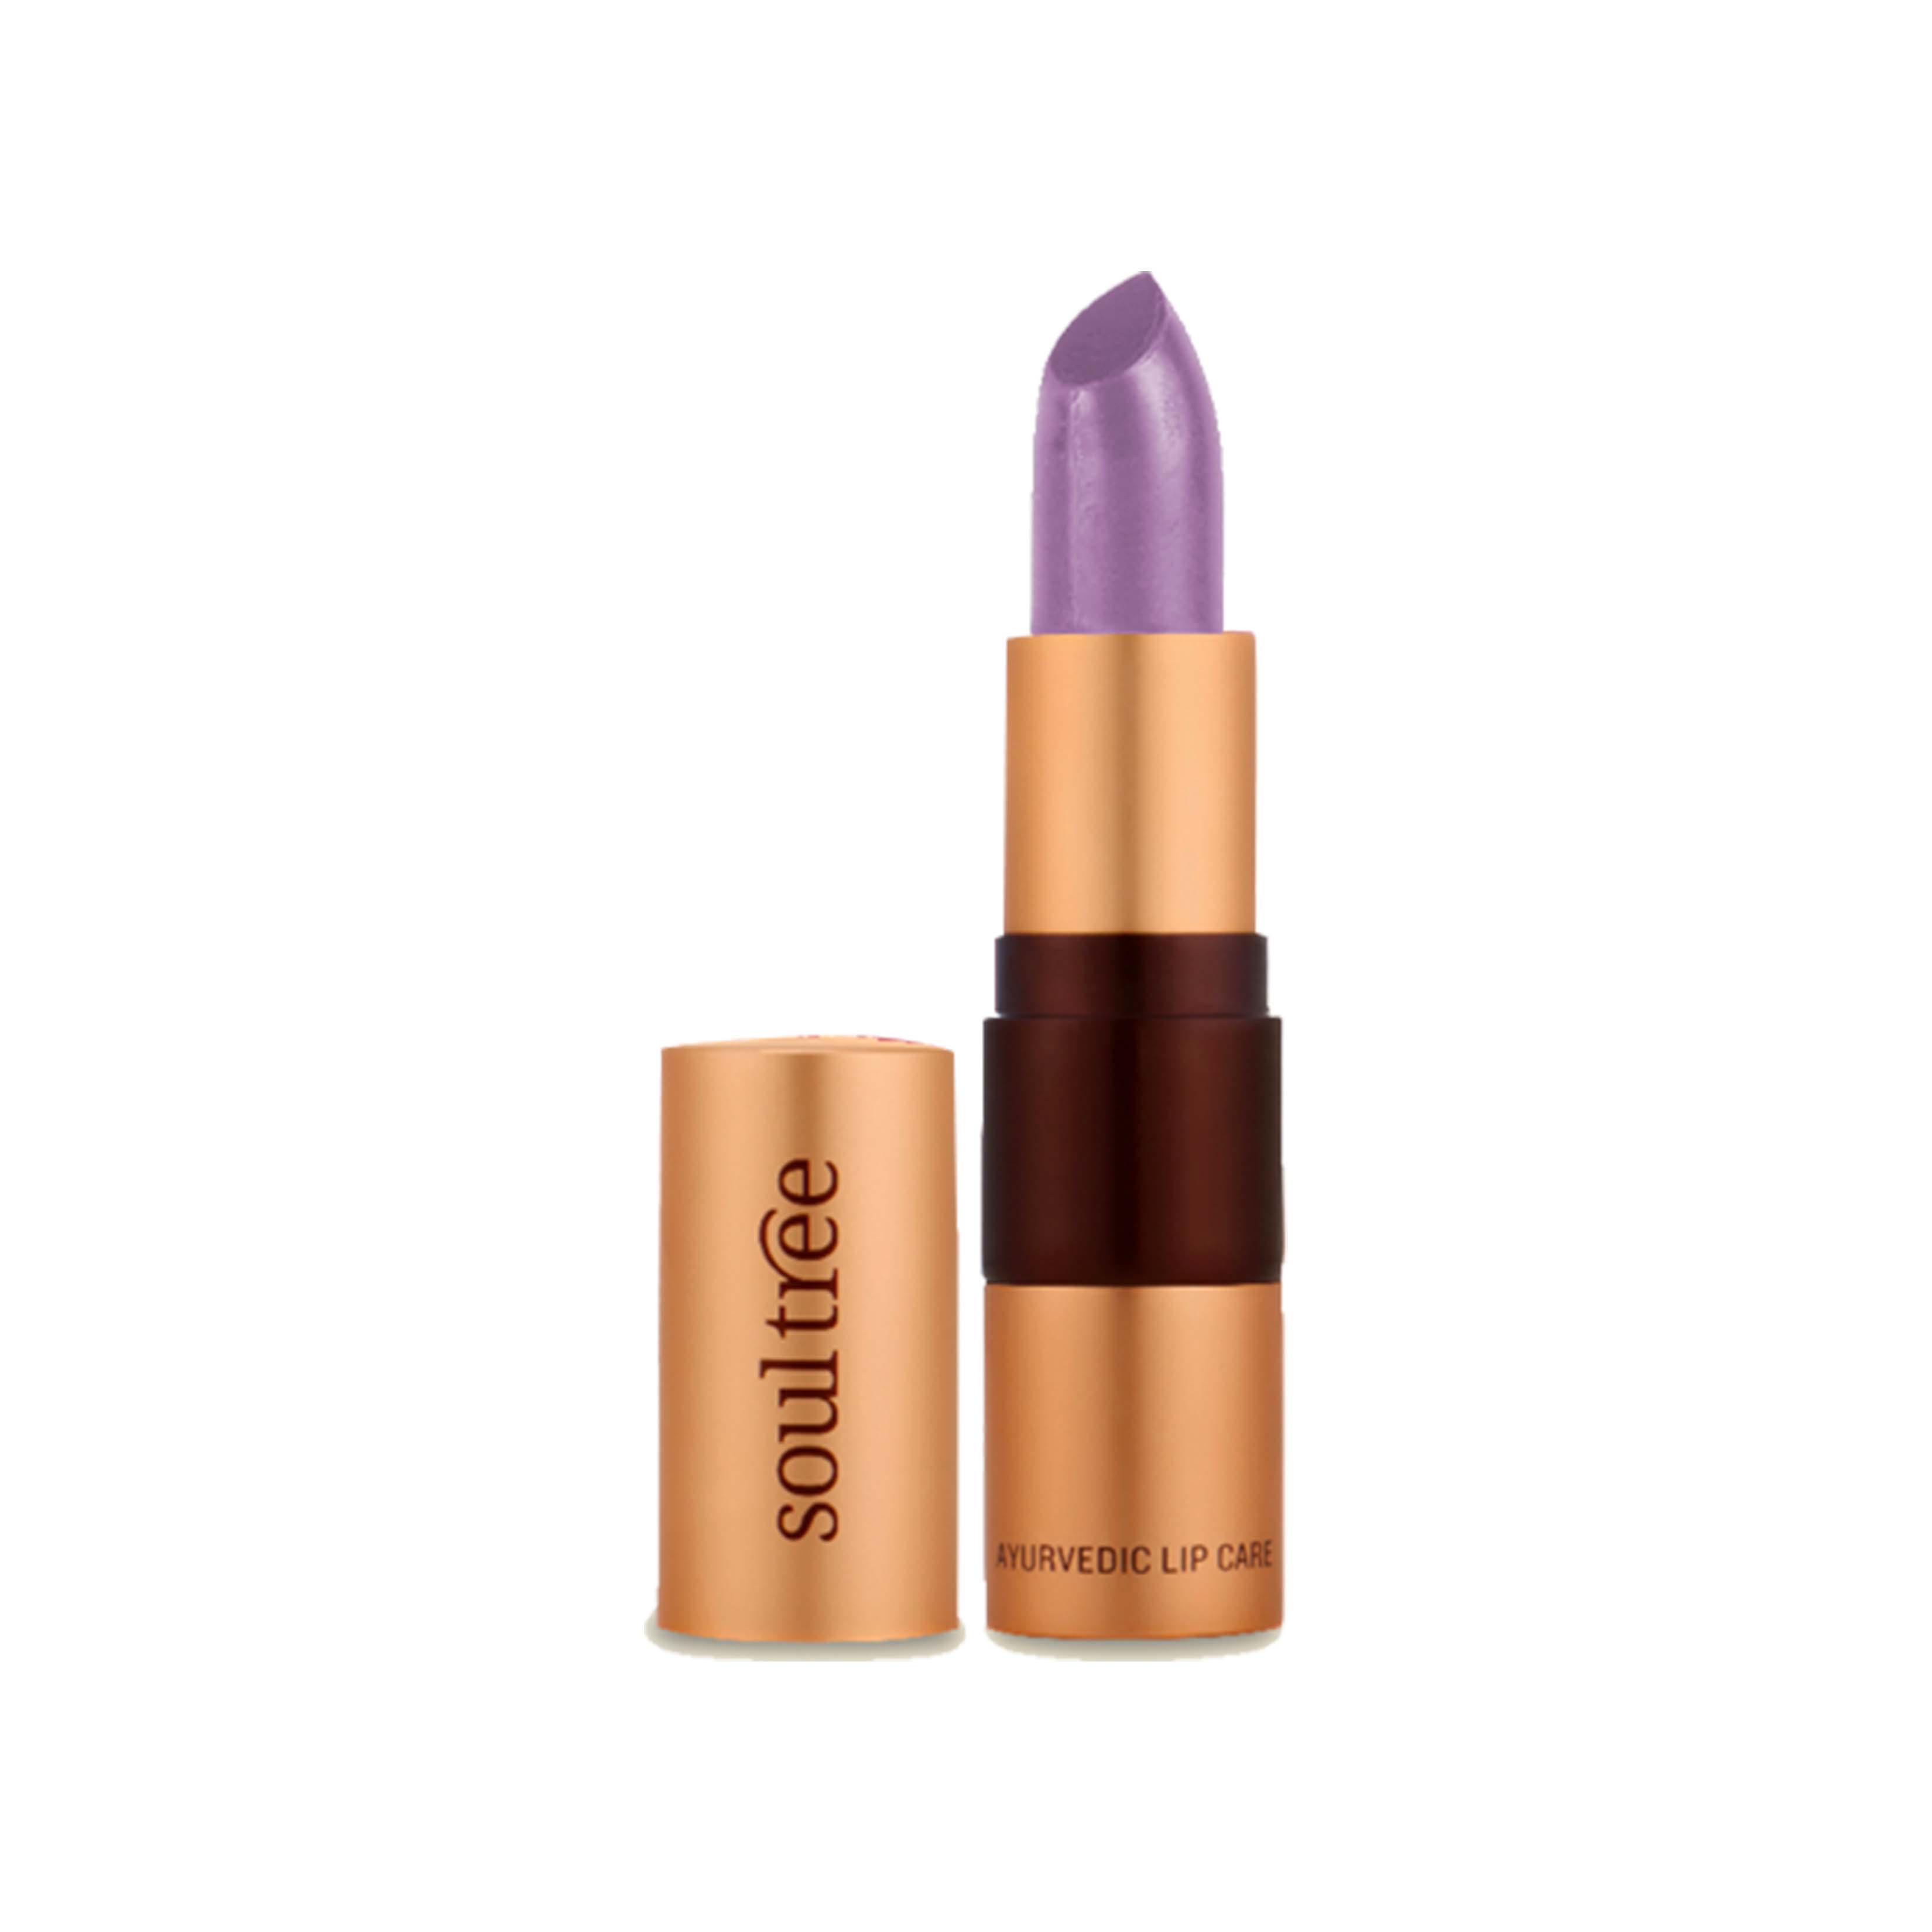 Lipstick Glowing Violet 513 - SoulTree